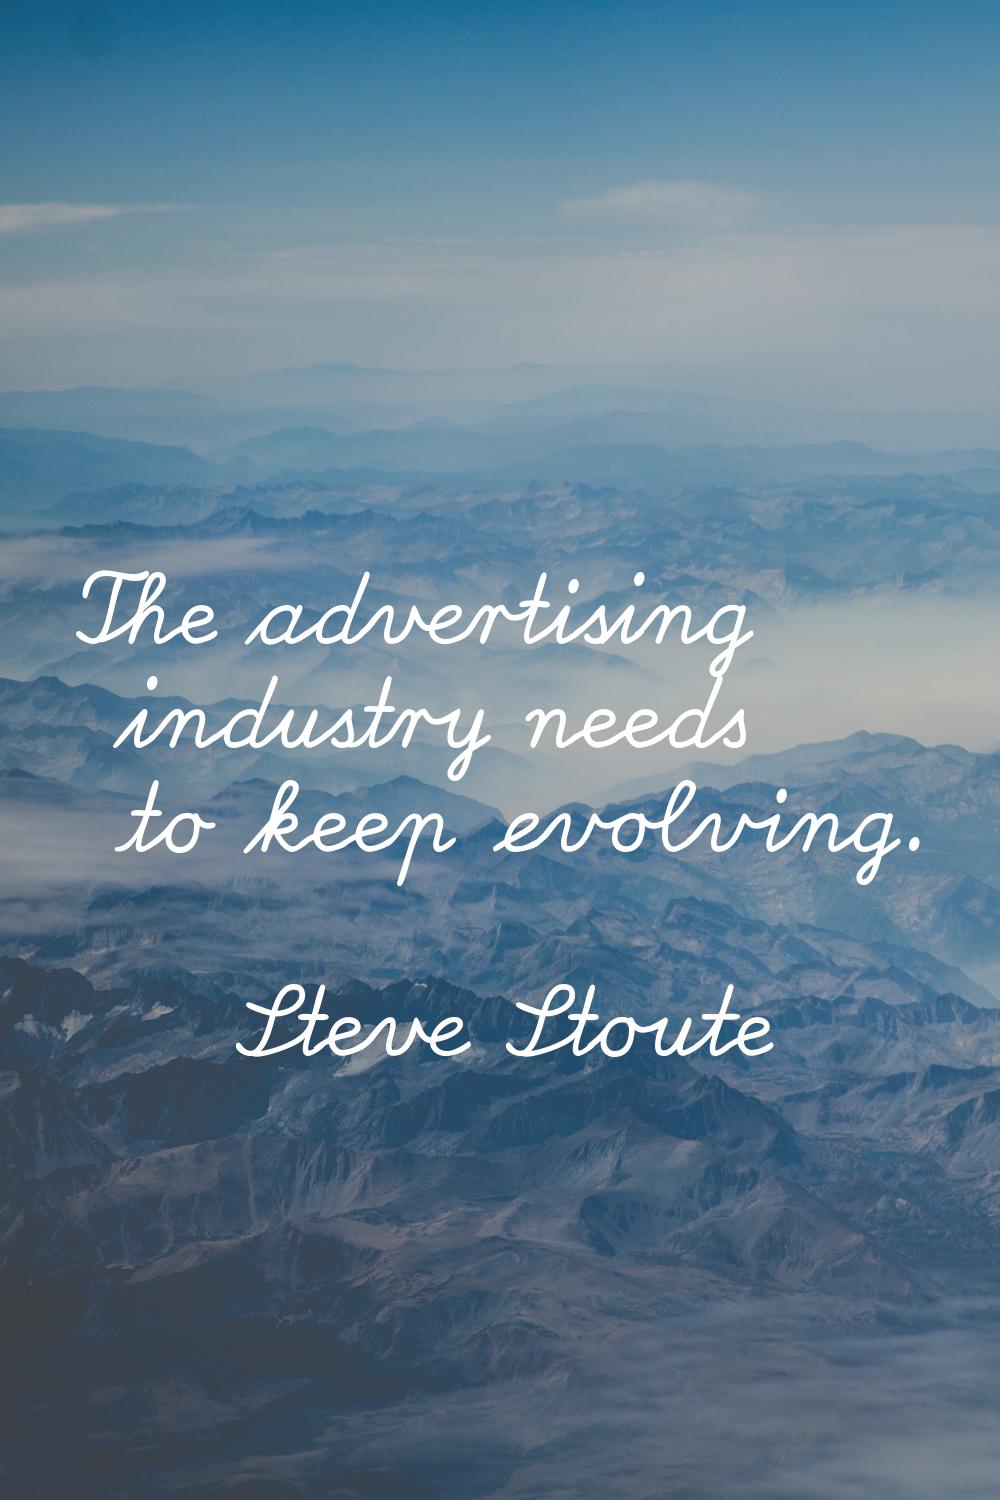 The advertising industry needs to keep evolving.